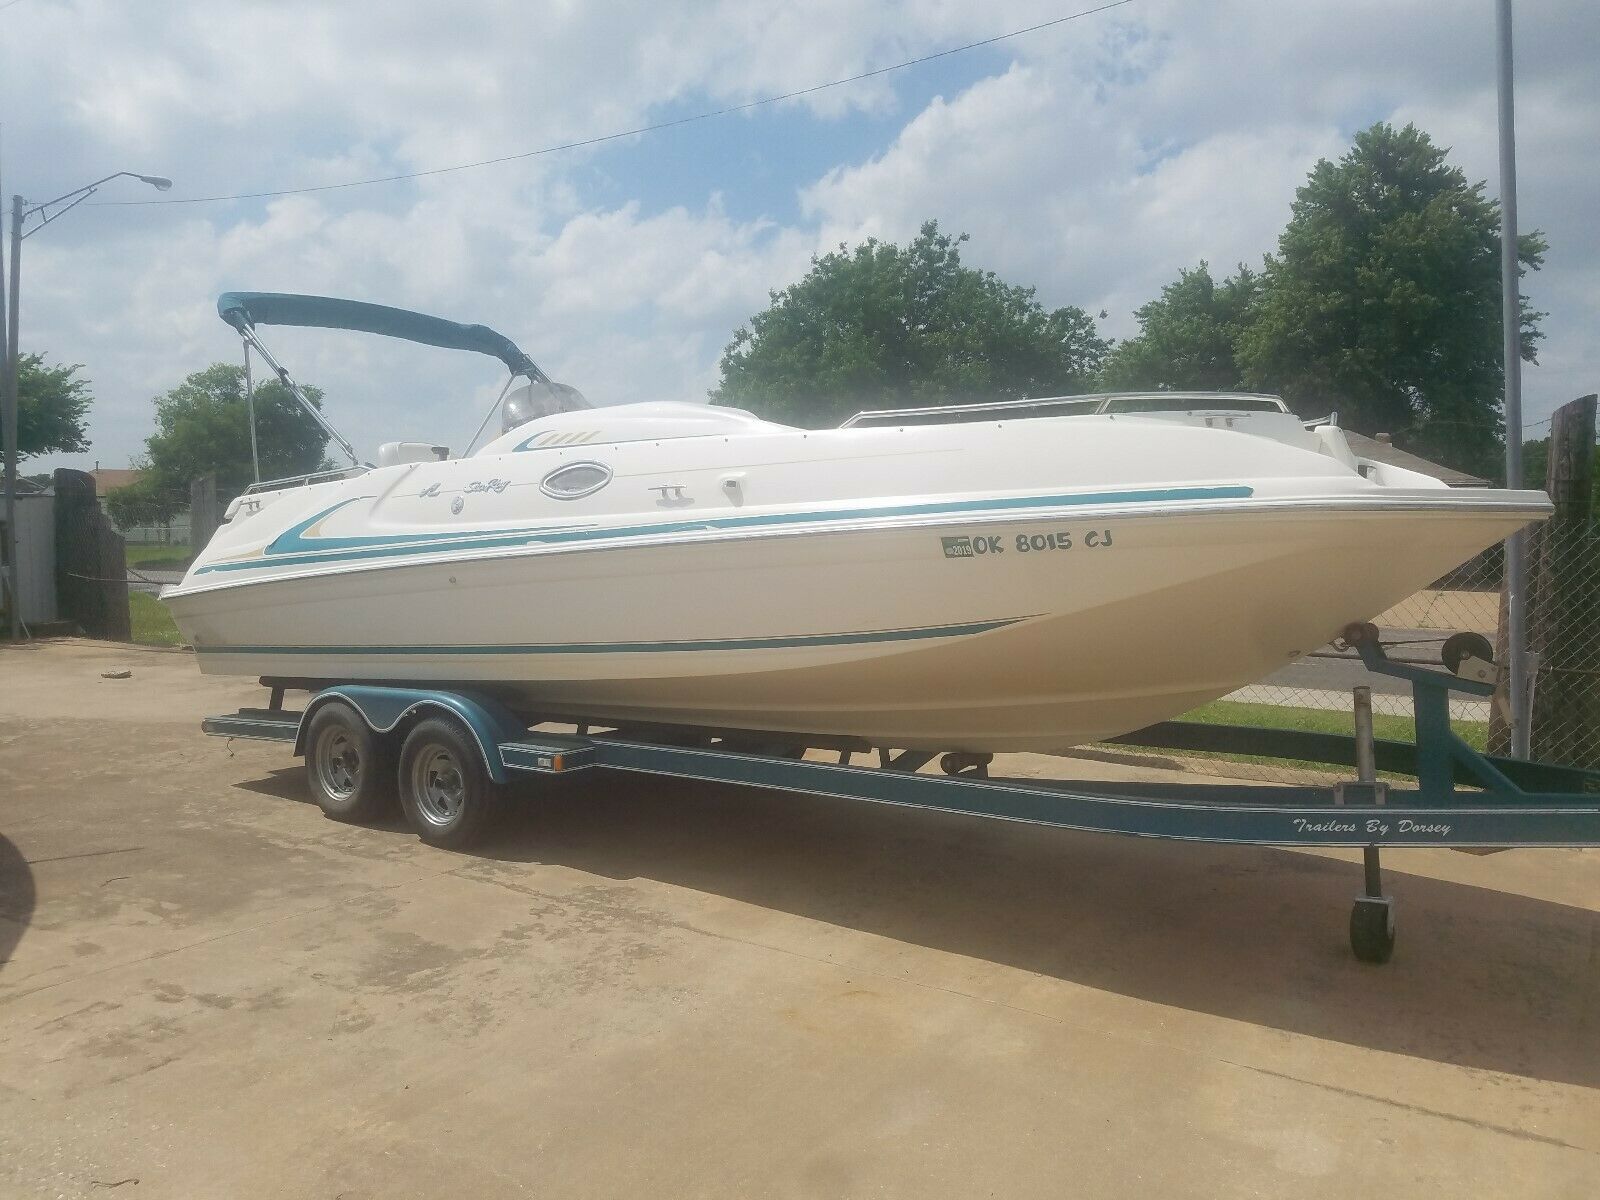 Sundeck Sea Ray Boat For Sale Page 15 Waa2